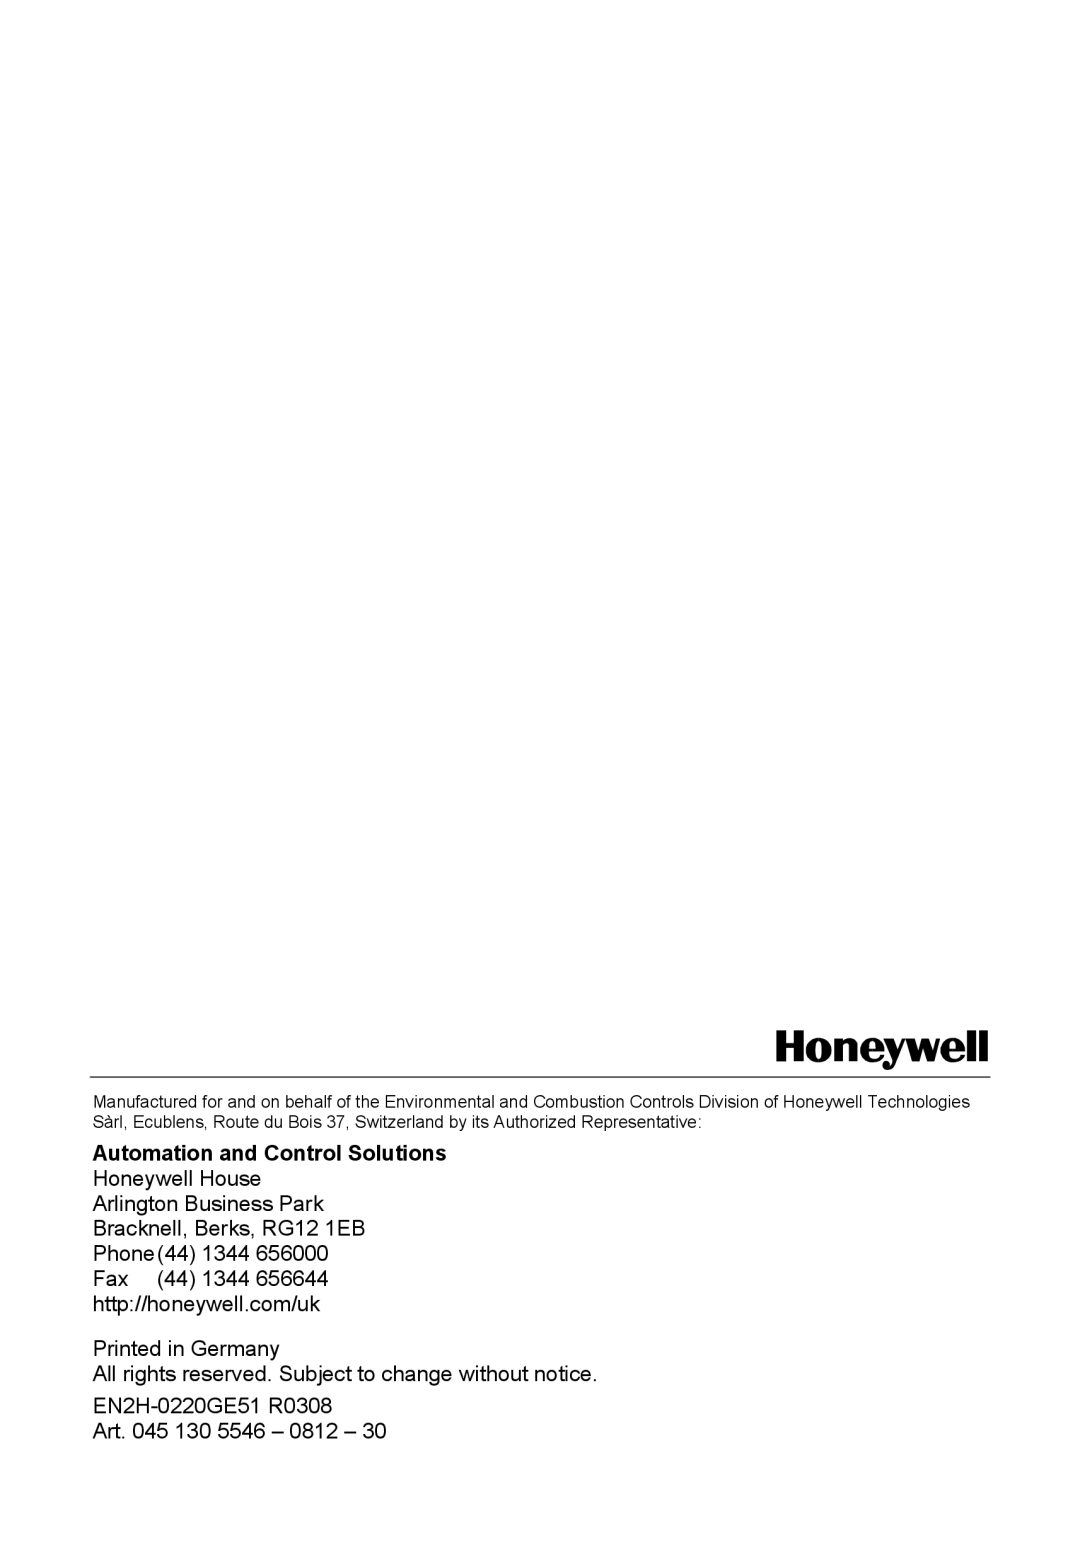 Honeywell SDC manual Automation and Control Solutions 